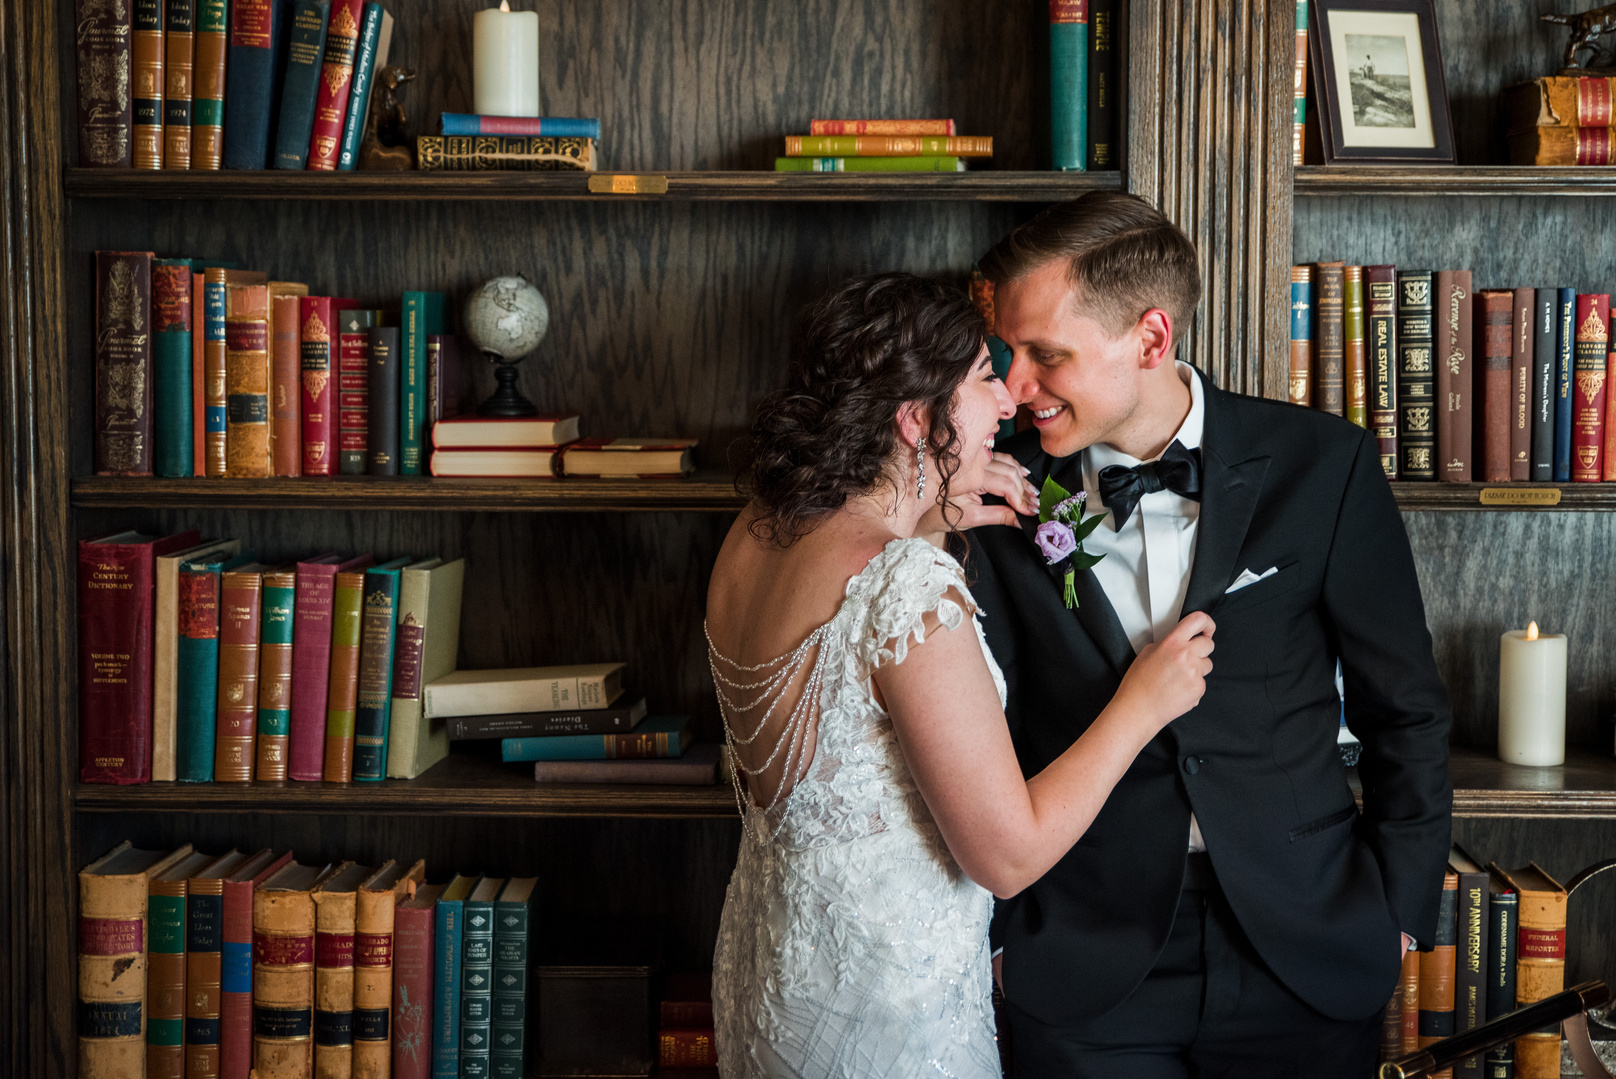 A bride and groom in front of bookshelf in The Manor House library.